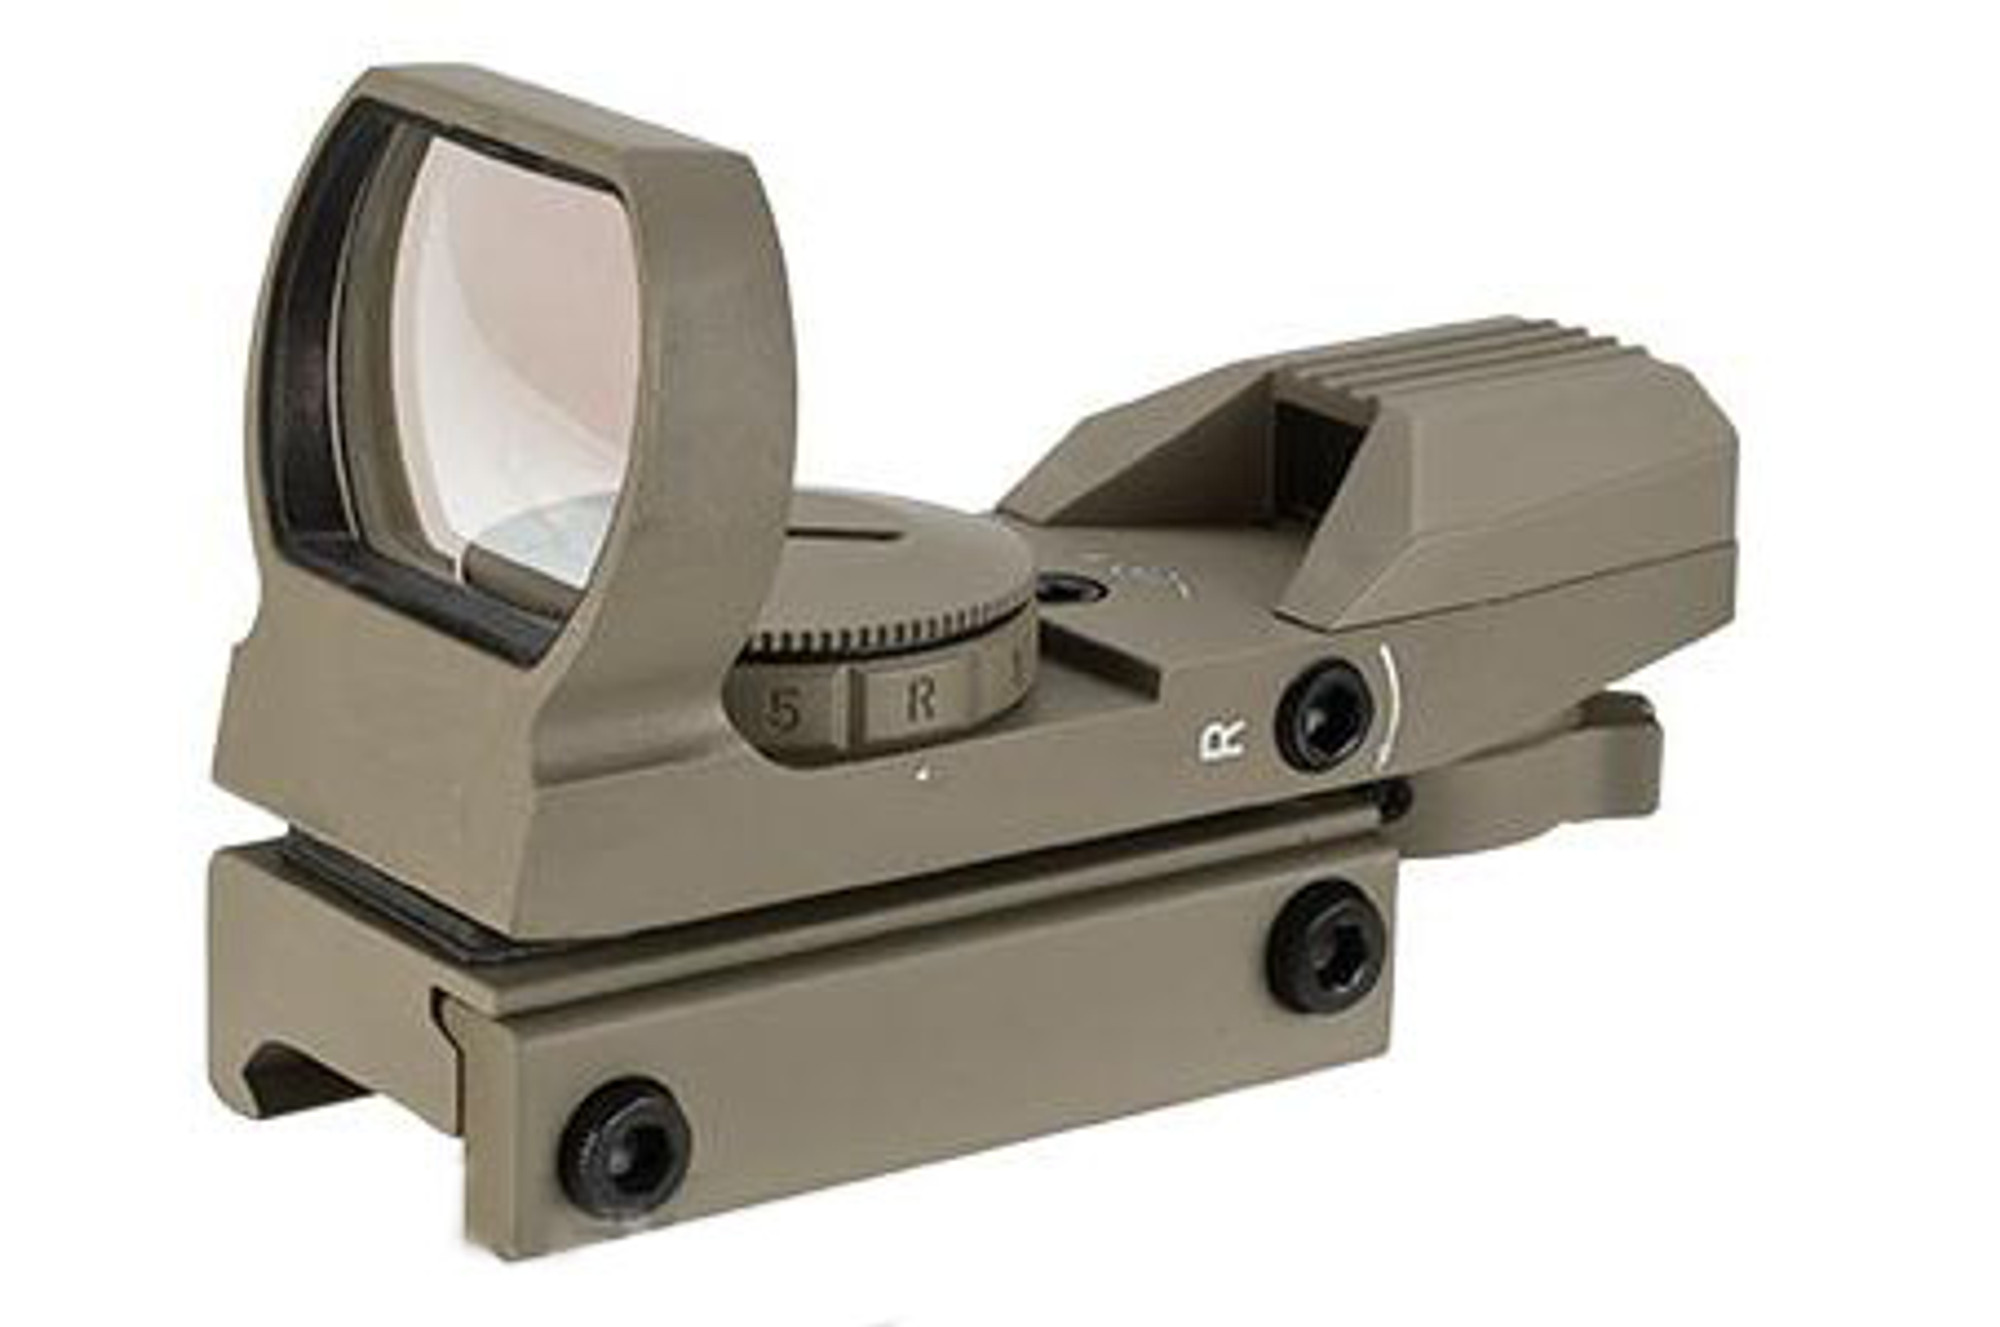 NcStar / VISM Red & Green Four Reticle Reflex Optic - Tan